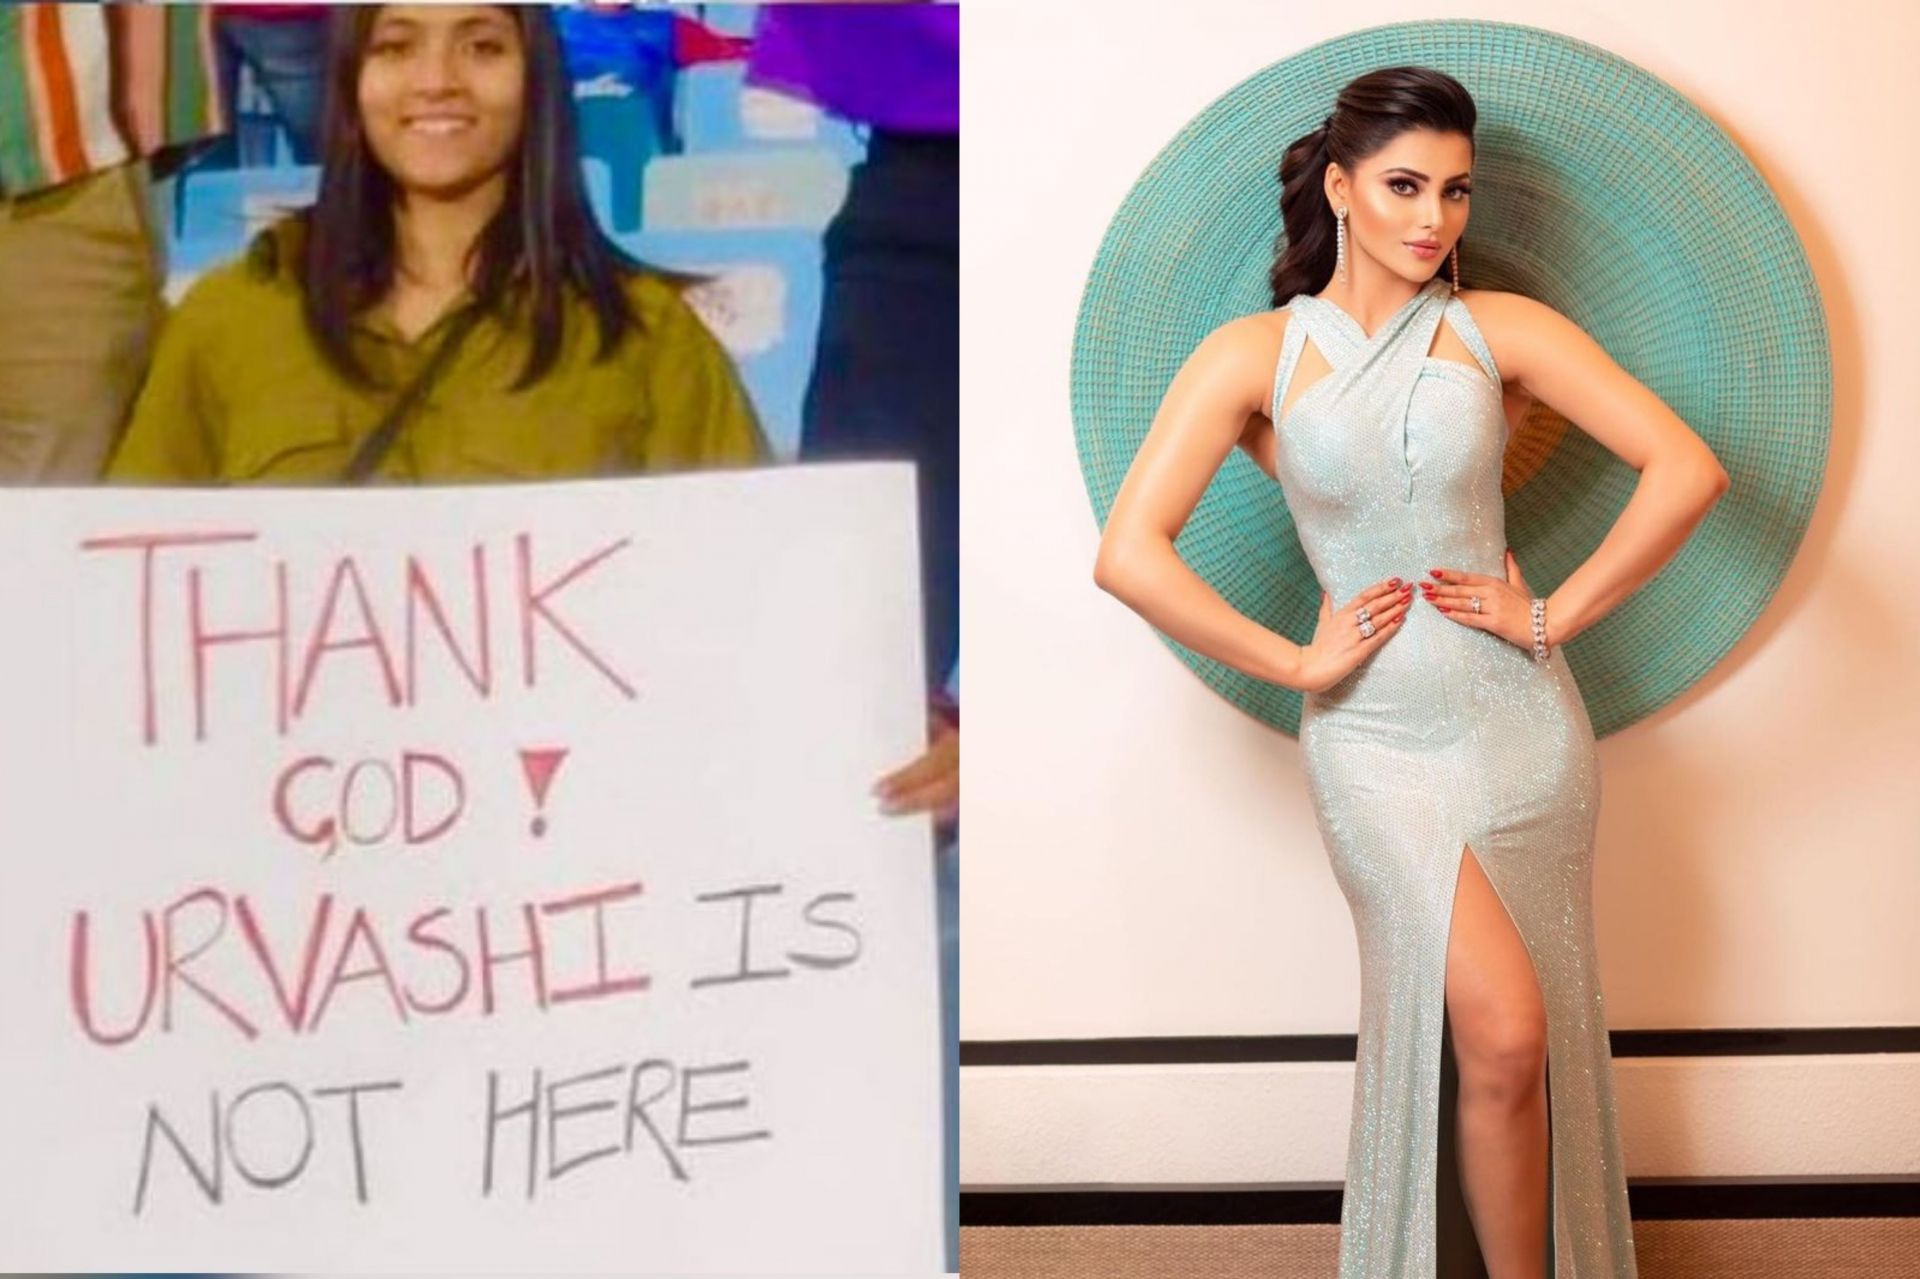 Urvashi Rautela is unhappy with a fan poster (Image: Instagram)